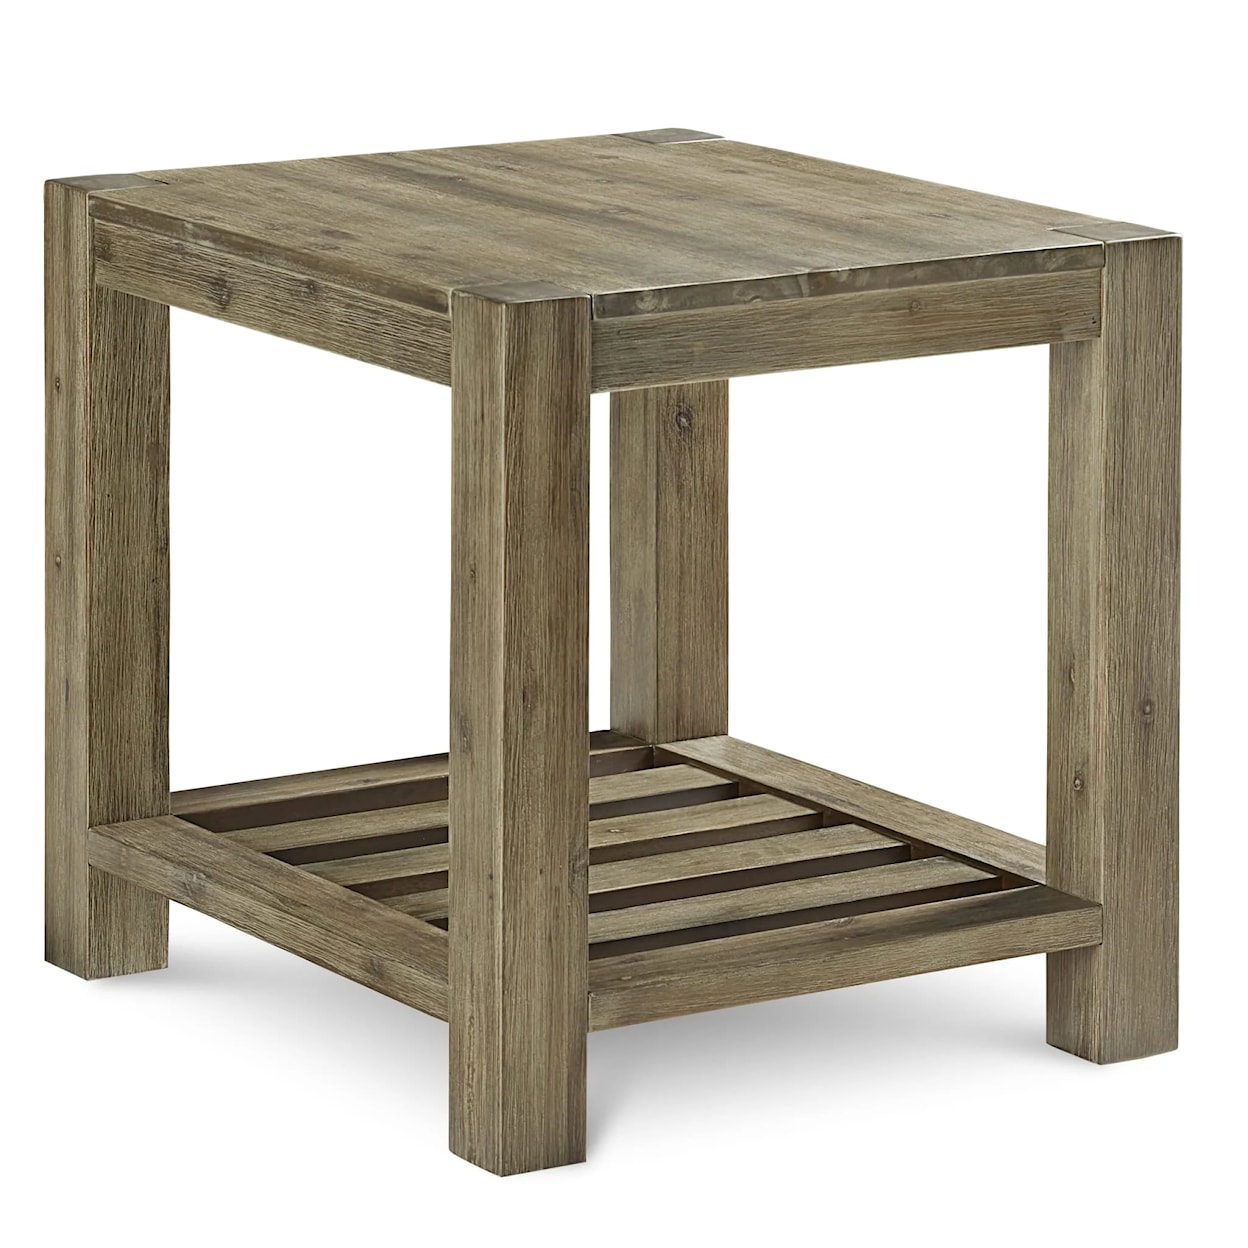 Modus International Canyon Washed Grey Solid Wood Rectangular End Table